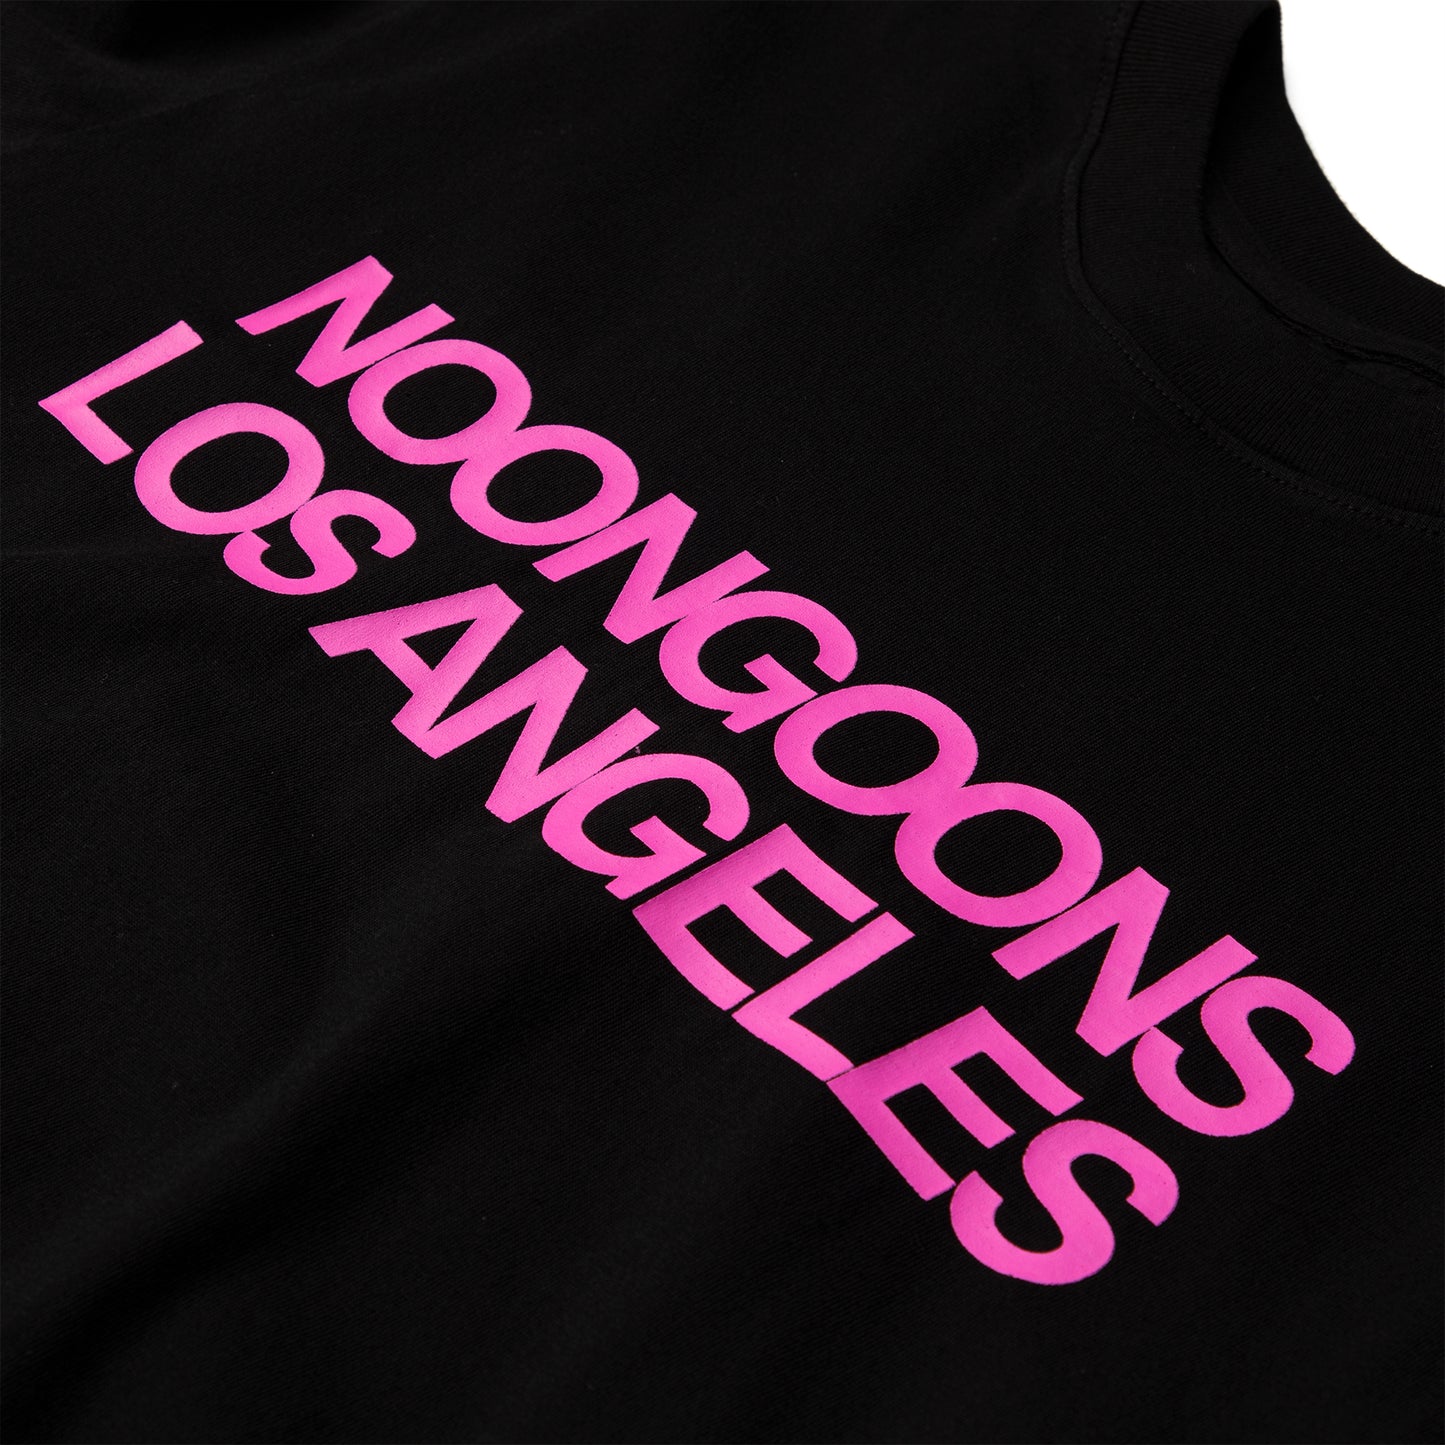 Noon Goons Right Here T-Shirt (Black)